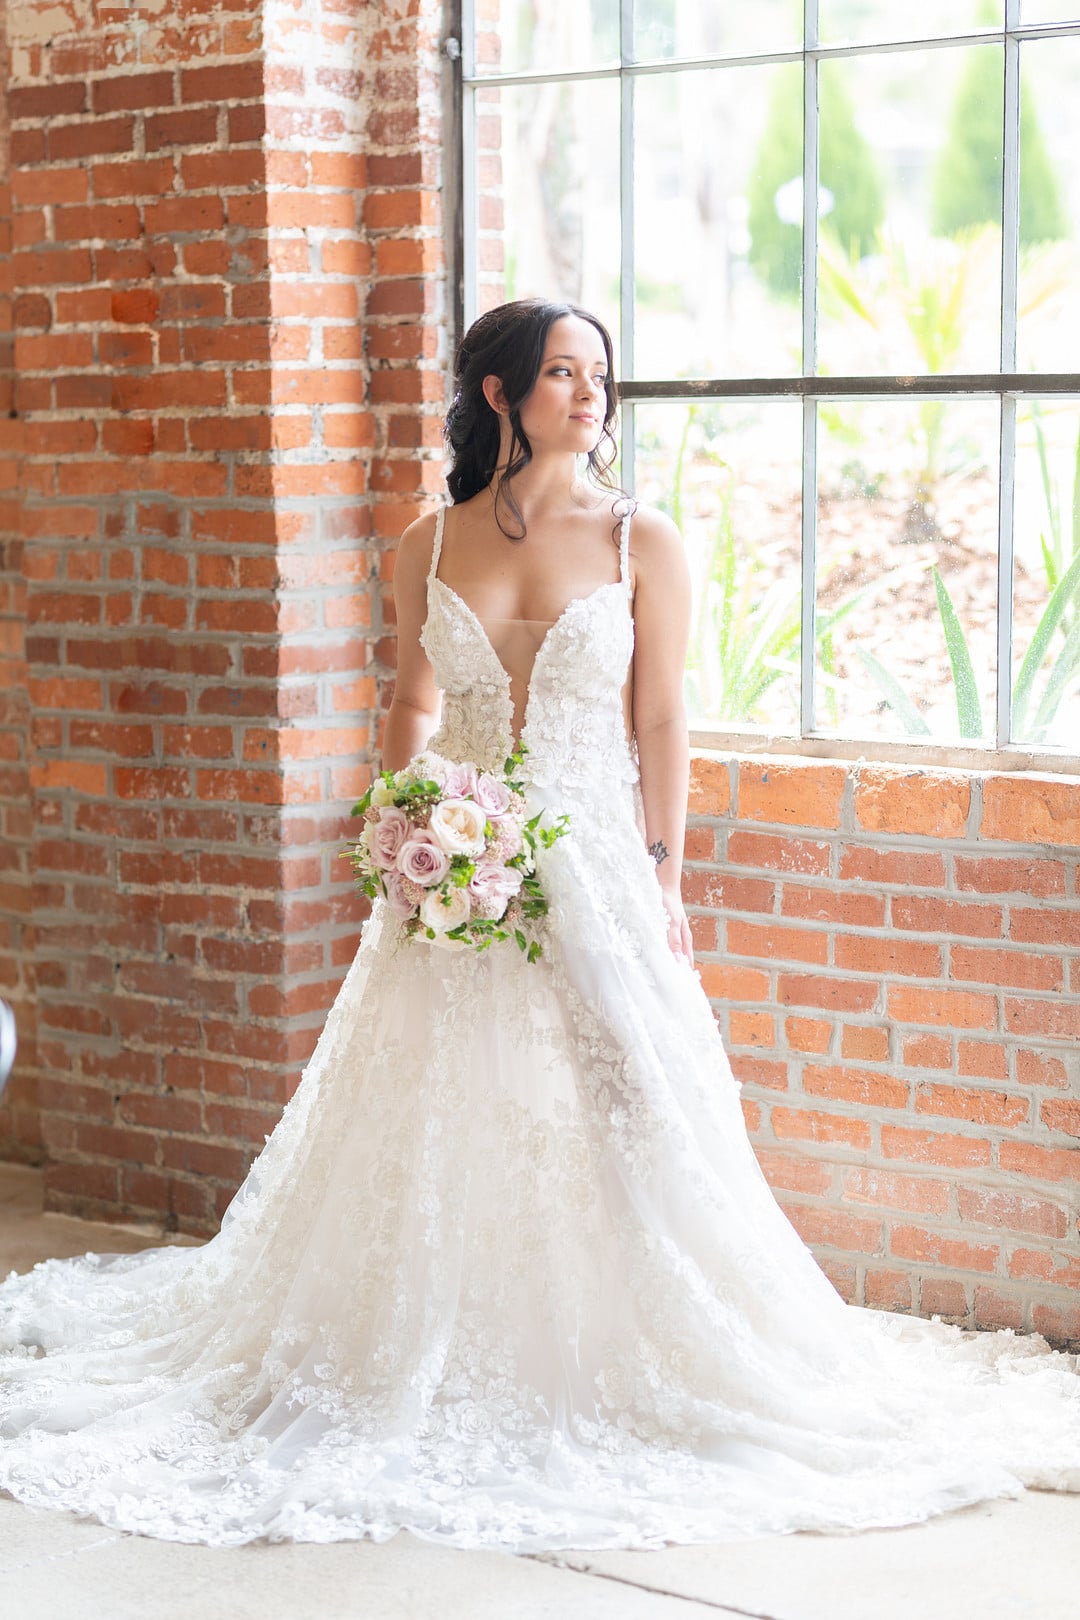 bride with a bouquet of flowers looking out the large windows with surrounding brick